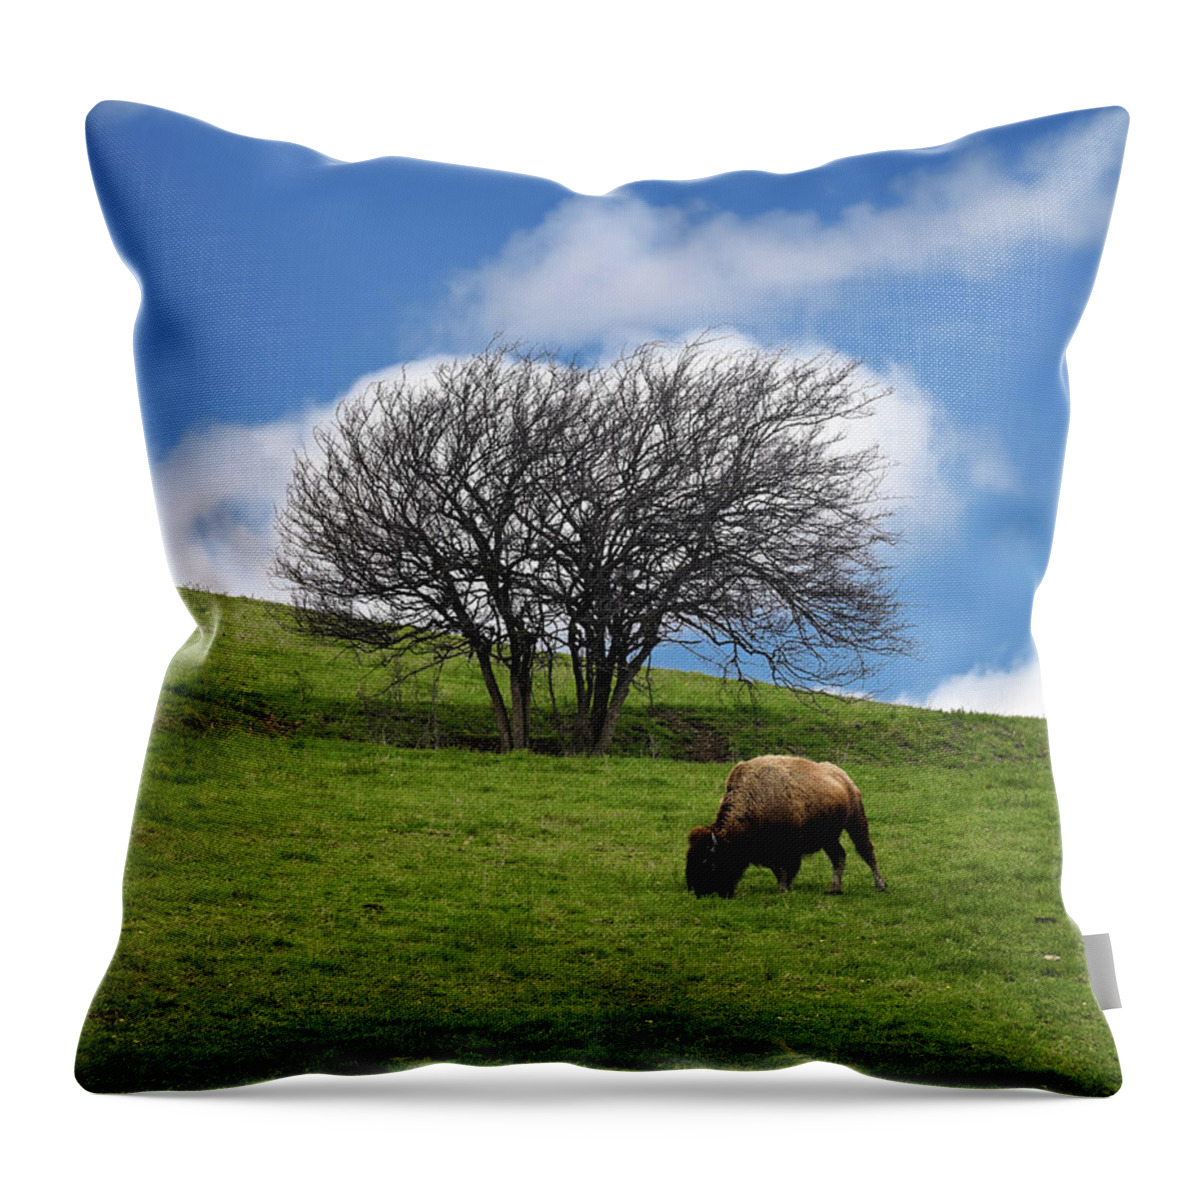 Bison Throw Pillow featuring the photograph Bison Tree by Steven Nelson